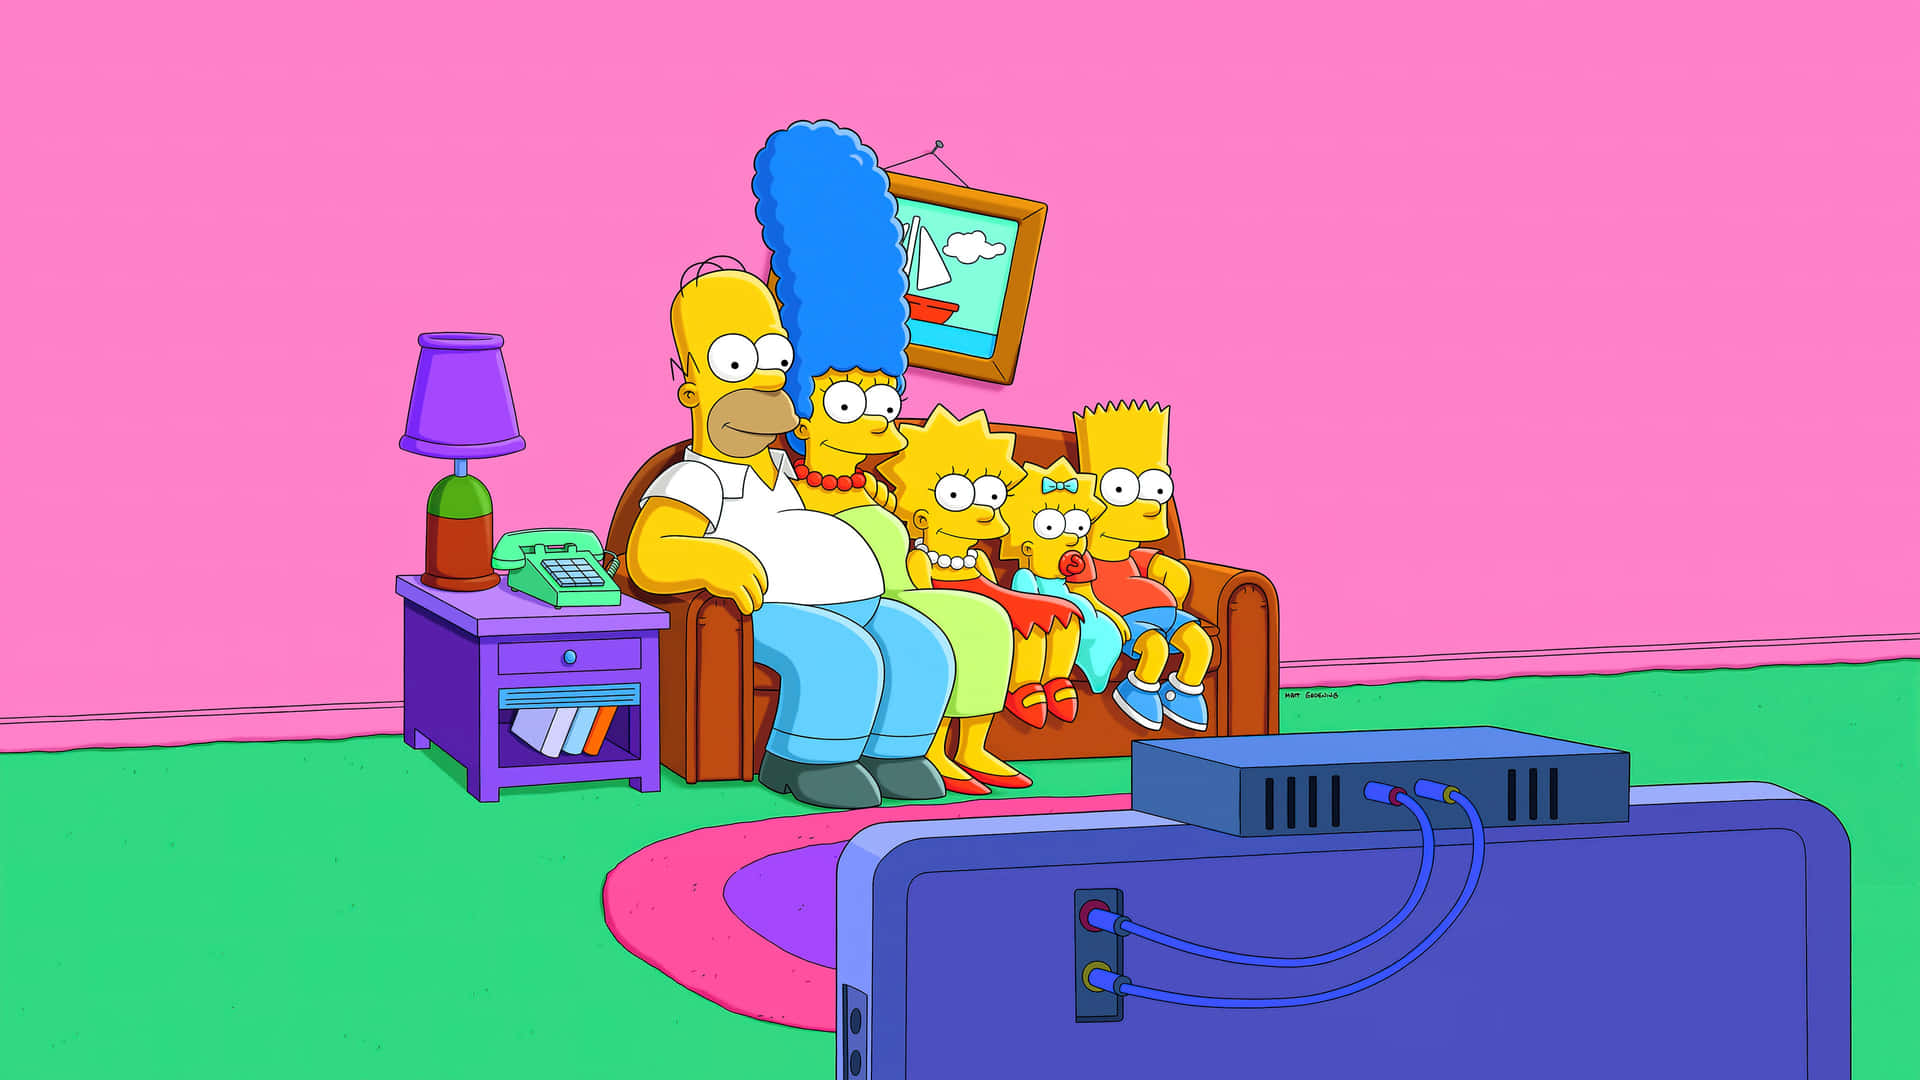 Keep Your PC Secure and Fun with a The Simpsons-Themed Wallpaper Wallpaper